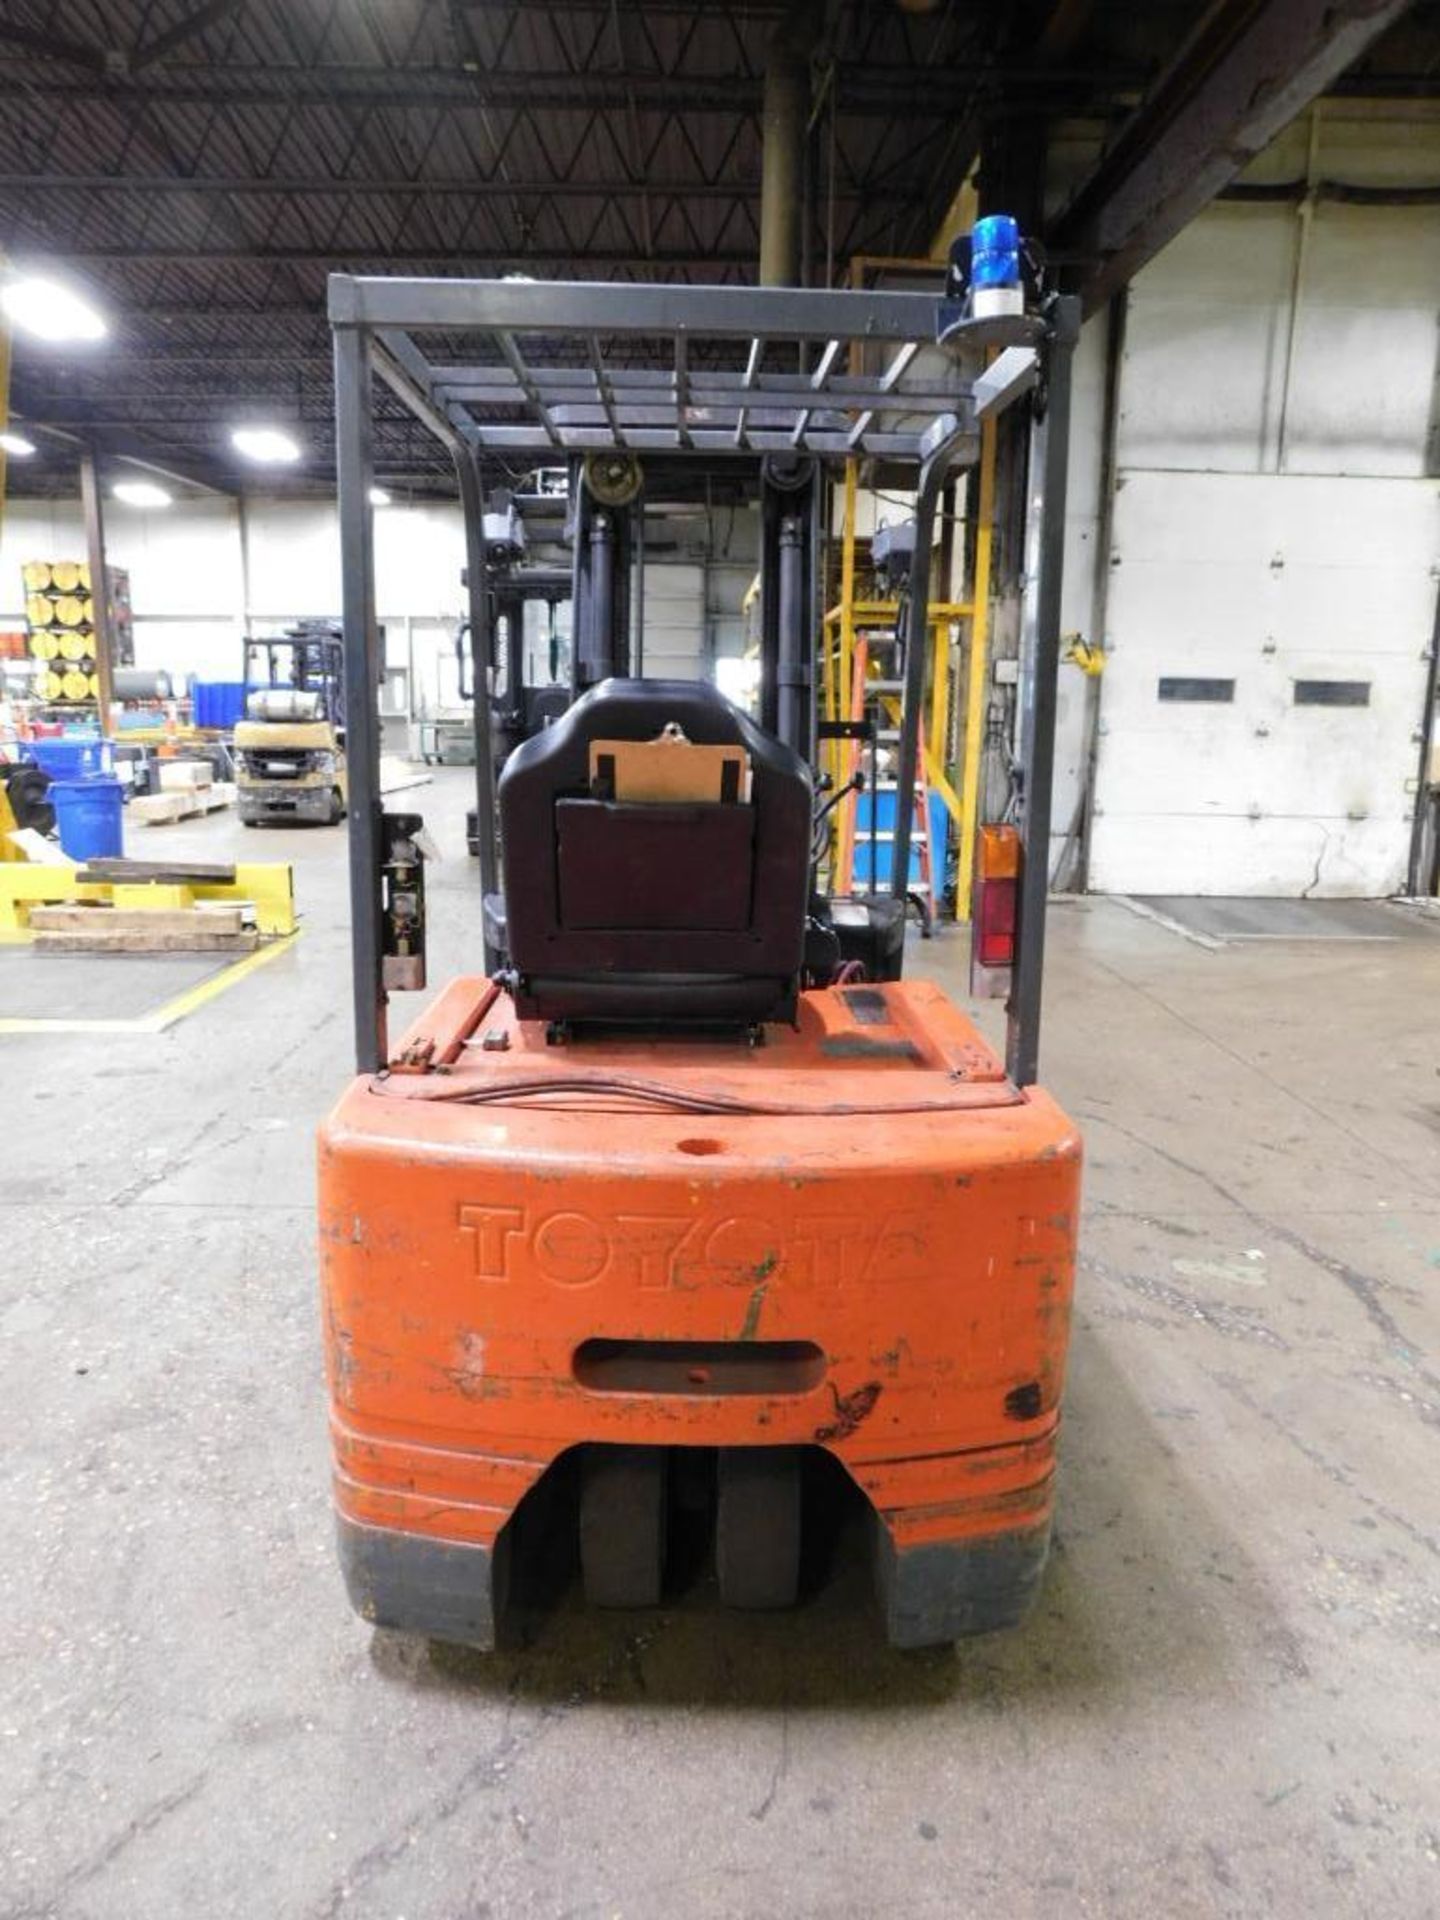 Toyota 3,450 Lb. Electric Forklift Model 5FBE20, S/N 10222, Solid Tires, 189" Max Lift Height, 3-Sta - Image 3 of 17